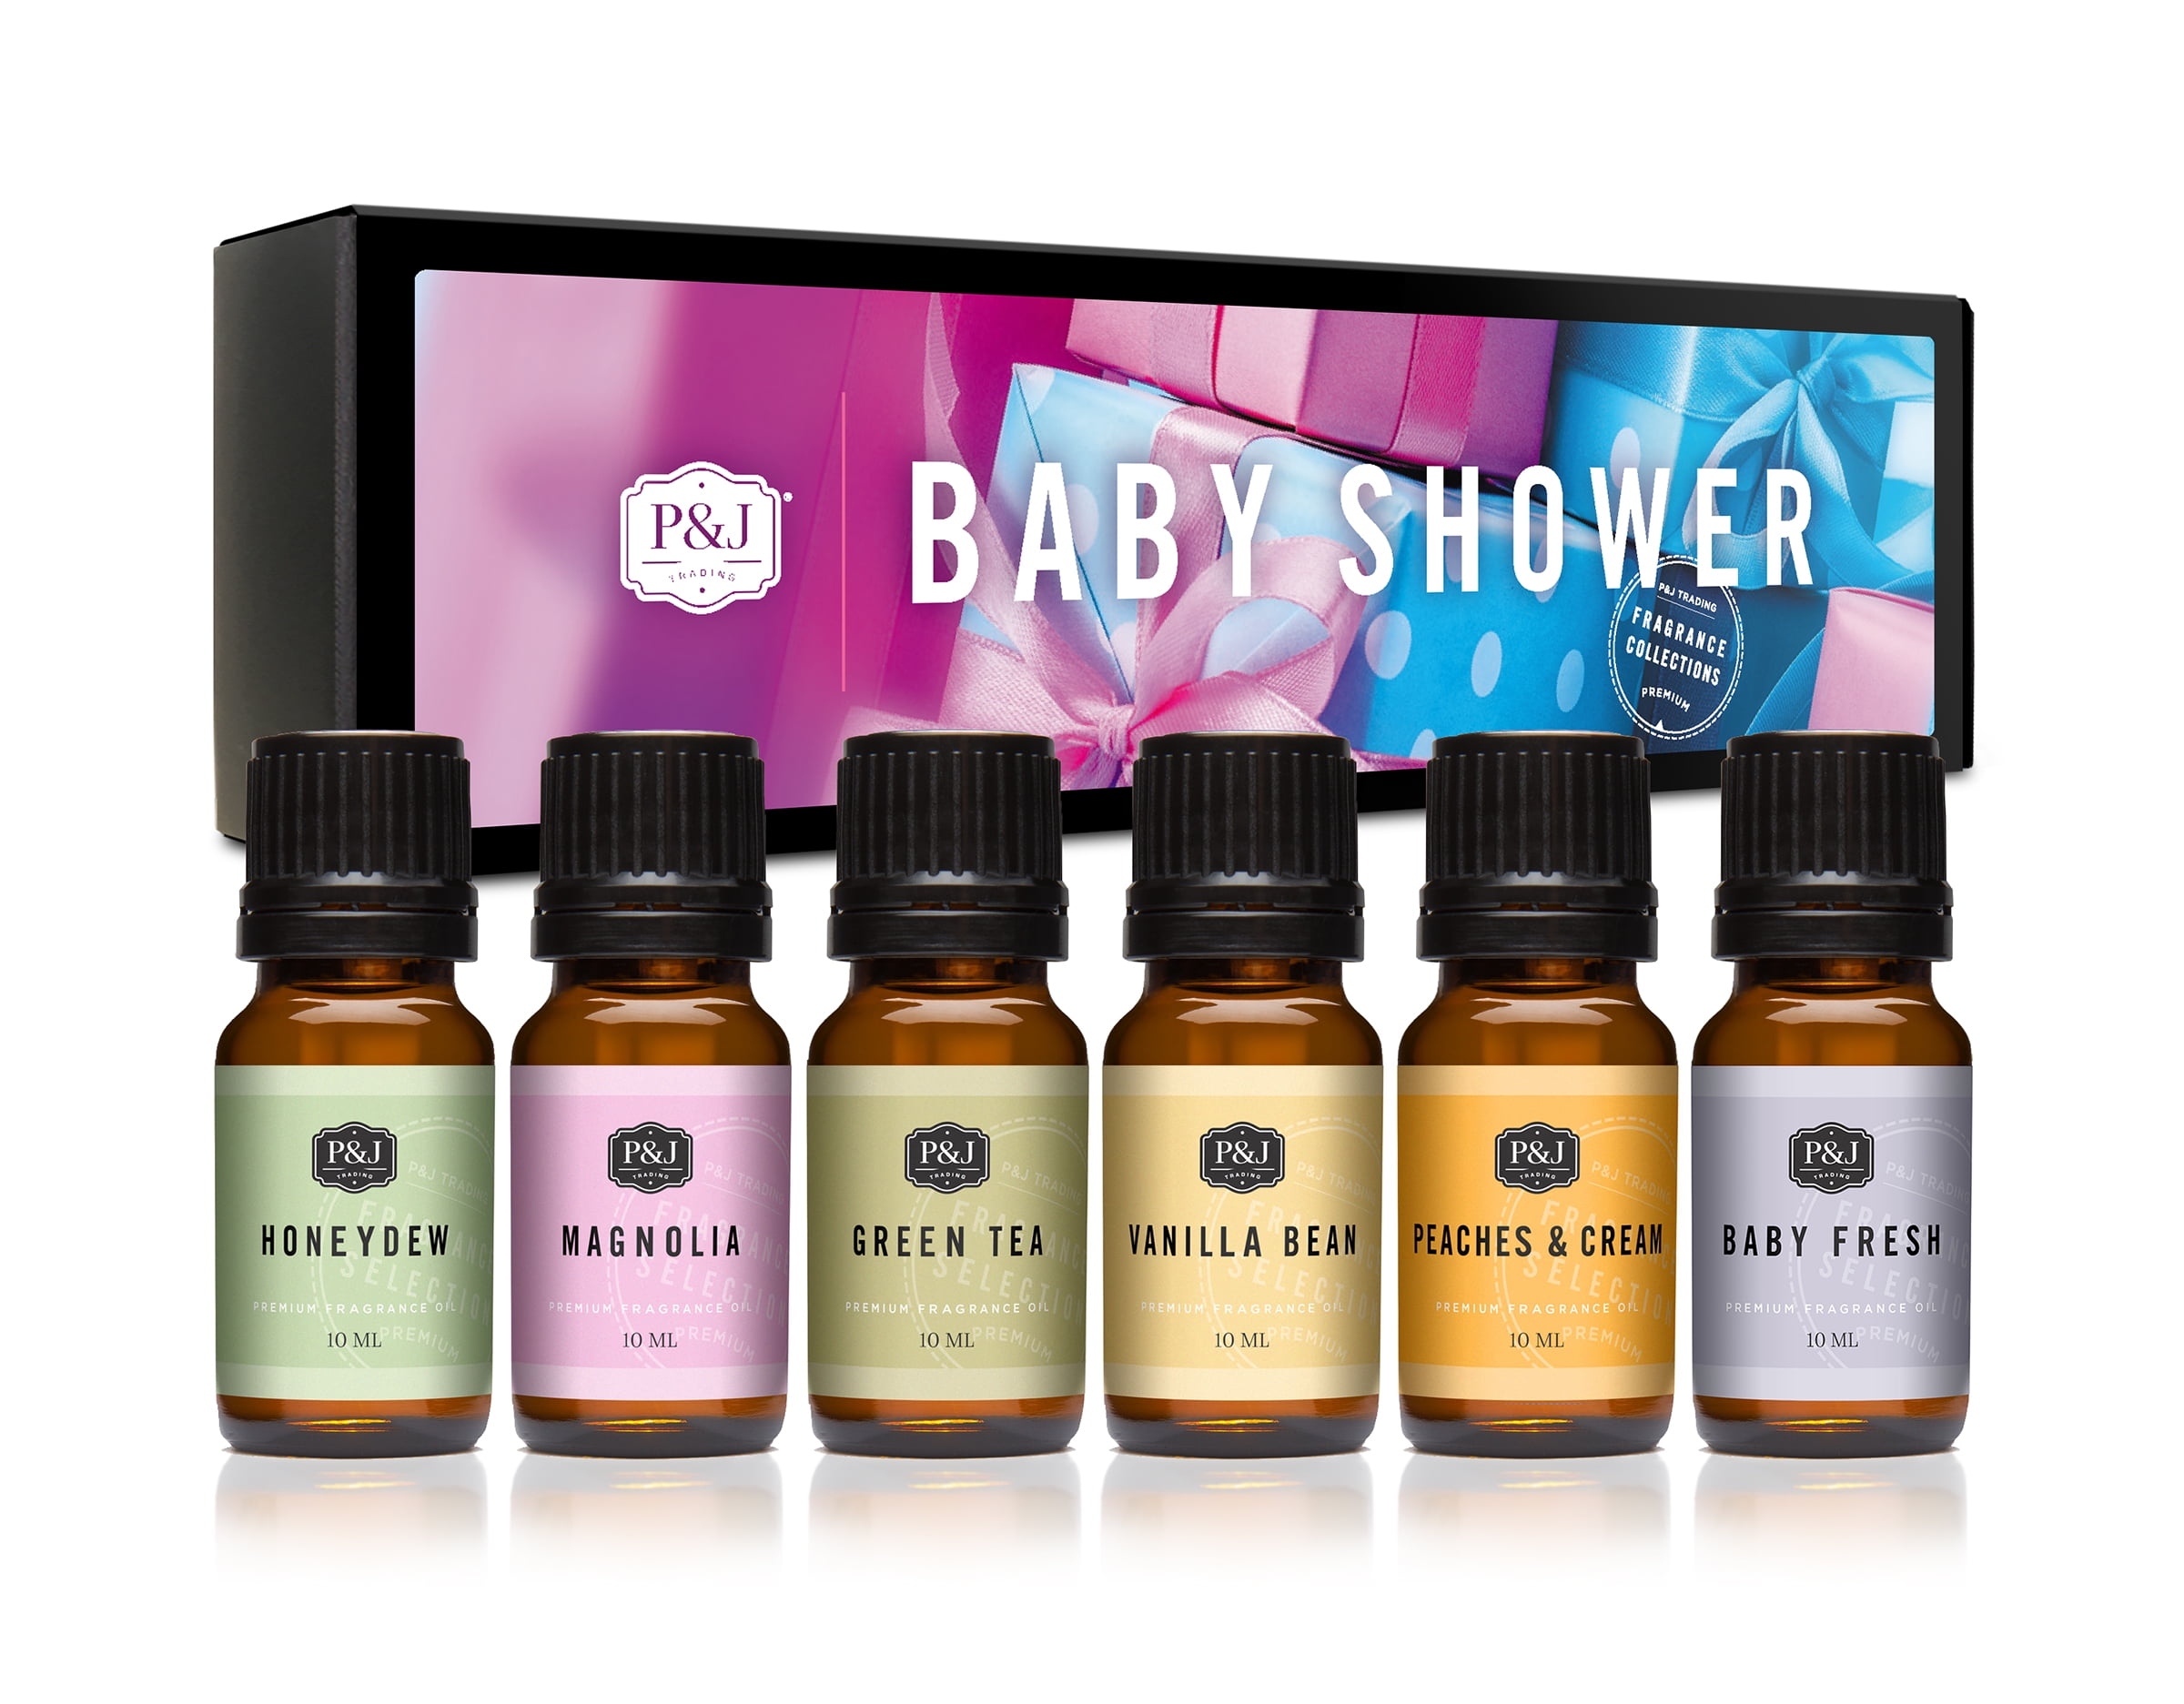 P&J Baby Shower Set of 6 Premium Fragrance Oil for Candle Making & Soap  Making, Lotions, Haircare, Diffuser Oils Scents